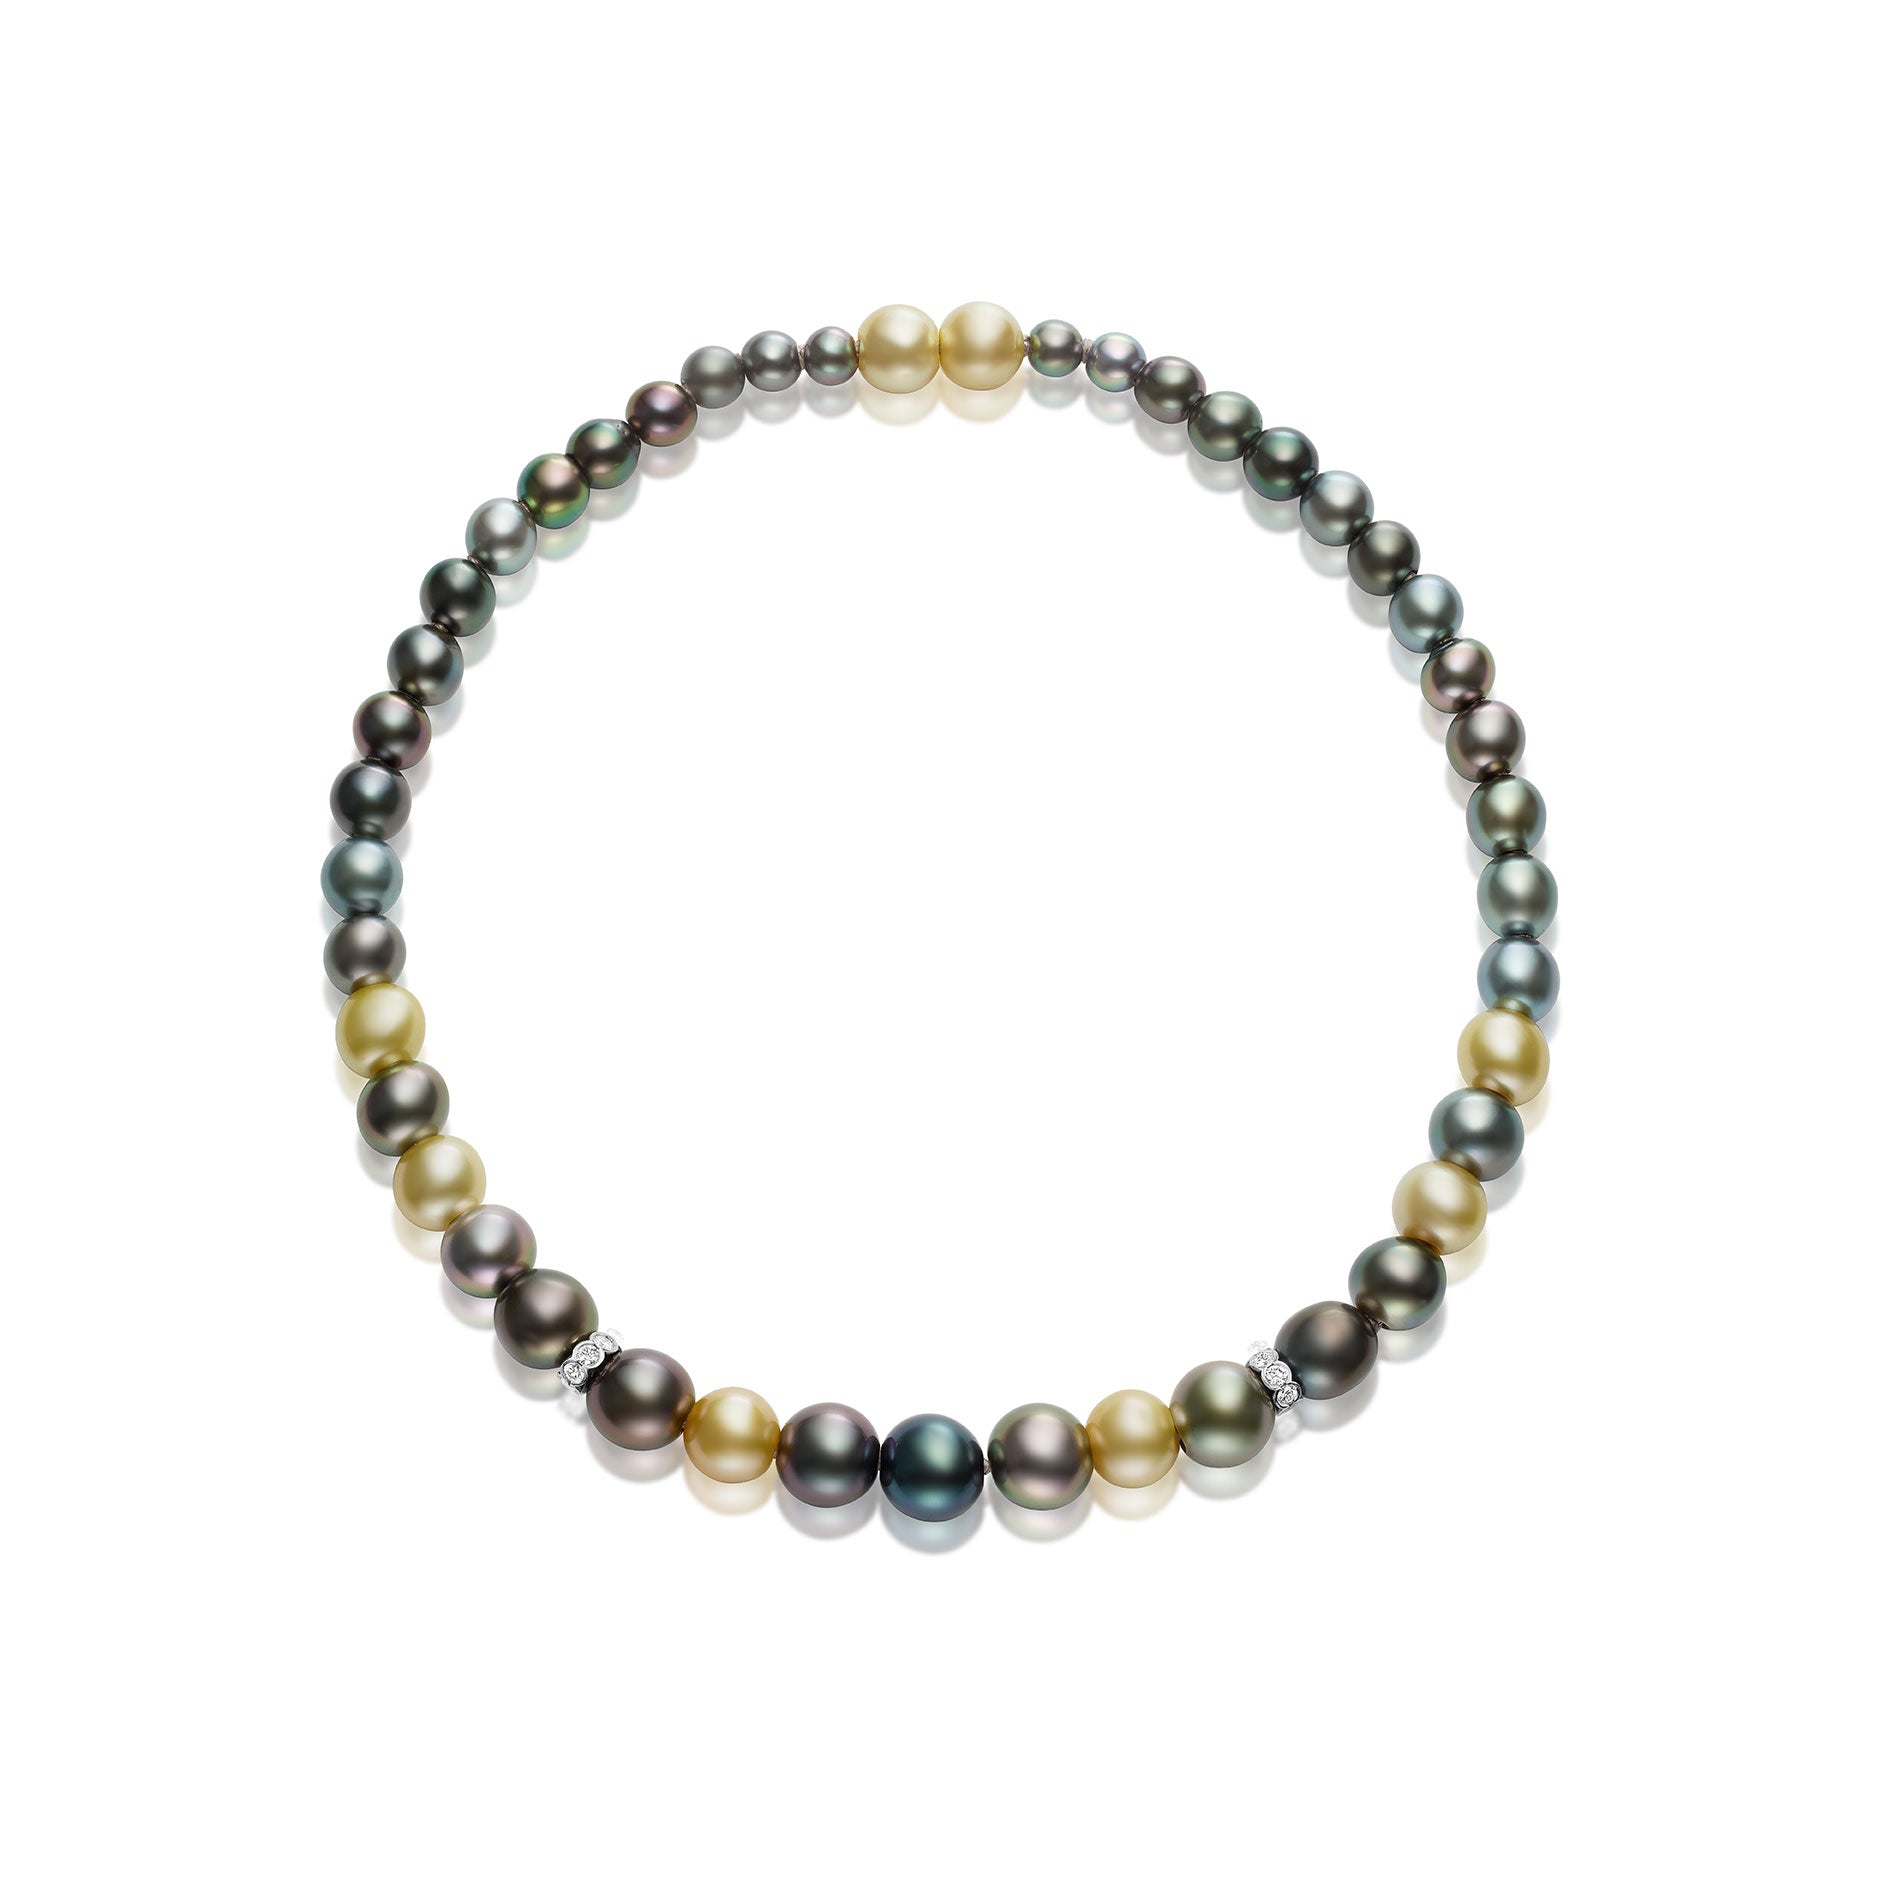 Mixed South Sea Tahitian Pearl Collier - ANNE BAKERMixed South Sea Tahitian Pearl CollierANNE BAKER